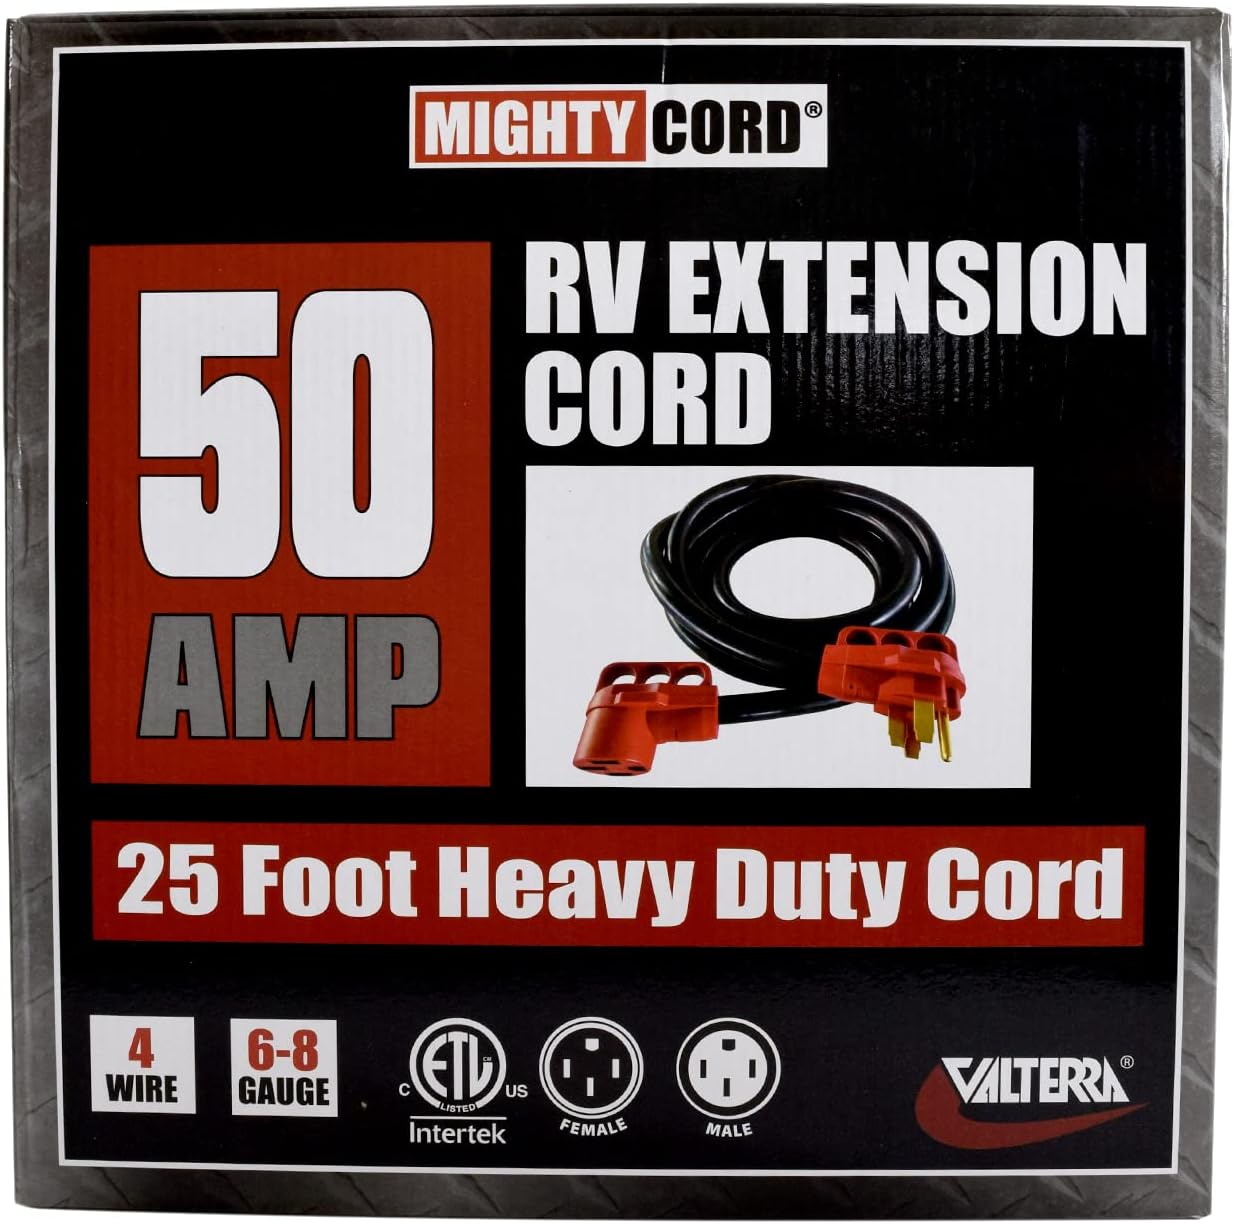 Valterra Mighty Cord 25ft, 50 Amp EV Extension Cord - 0